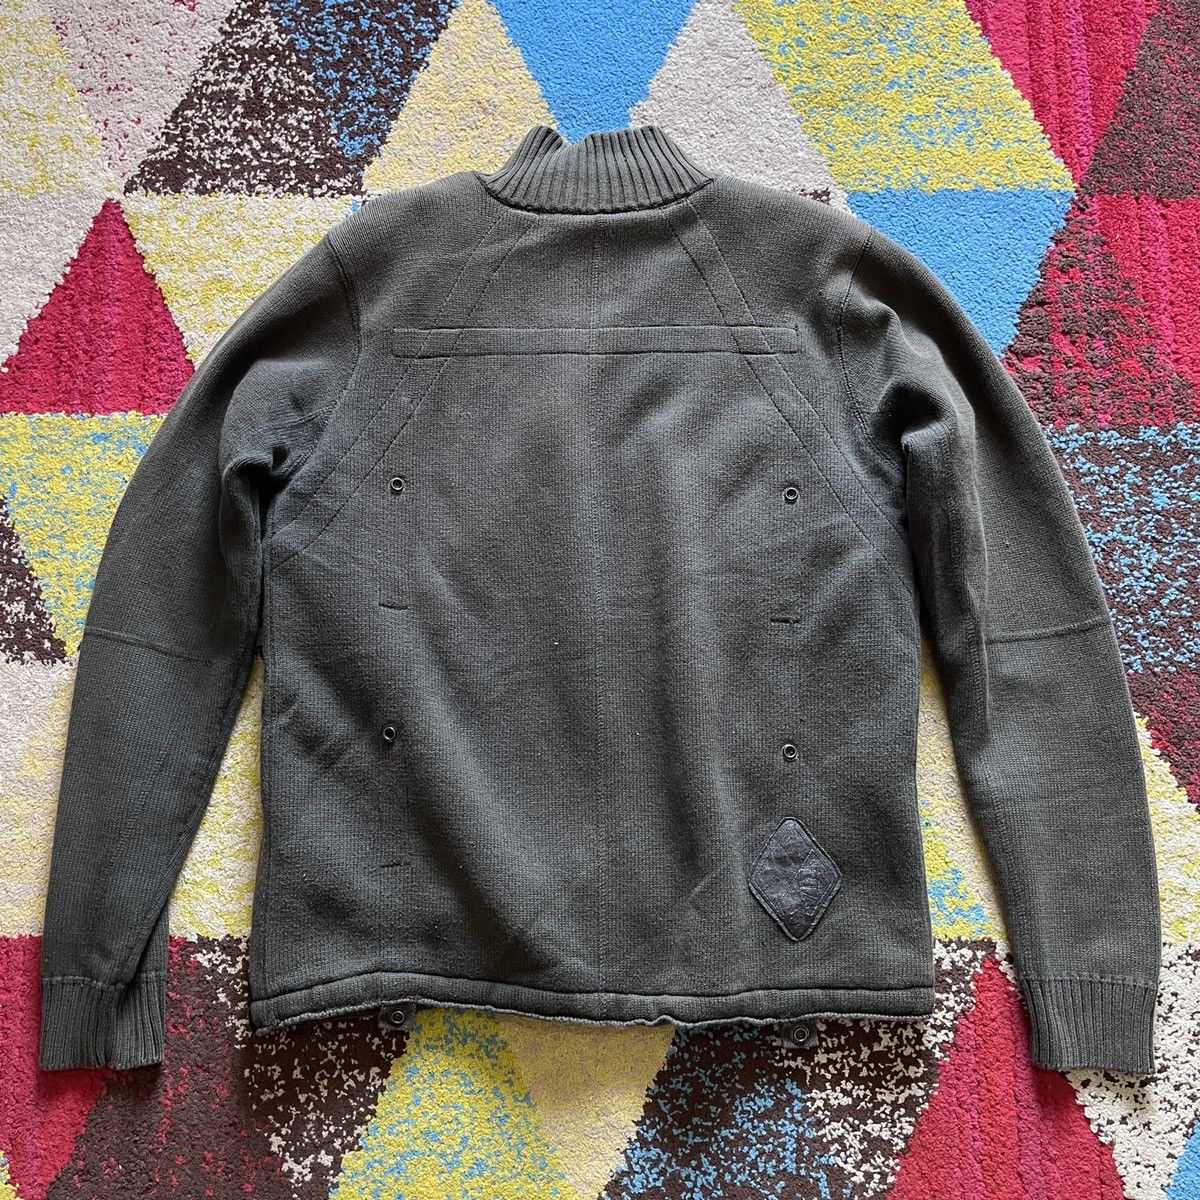 Vintage - G Star Raw Army Tactical Knitwear Wool Sweater Jacket - 15